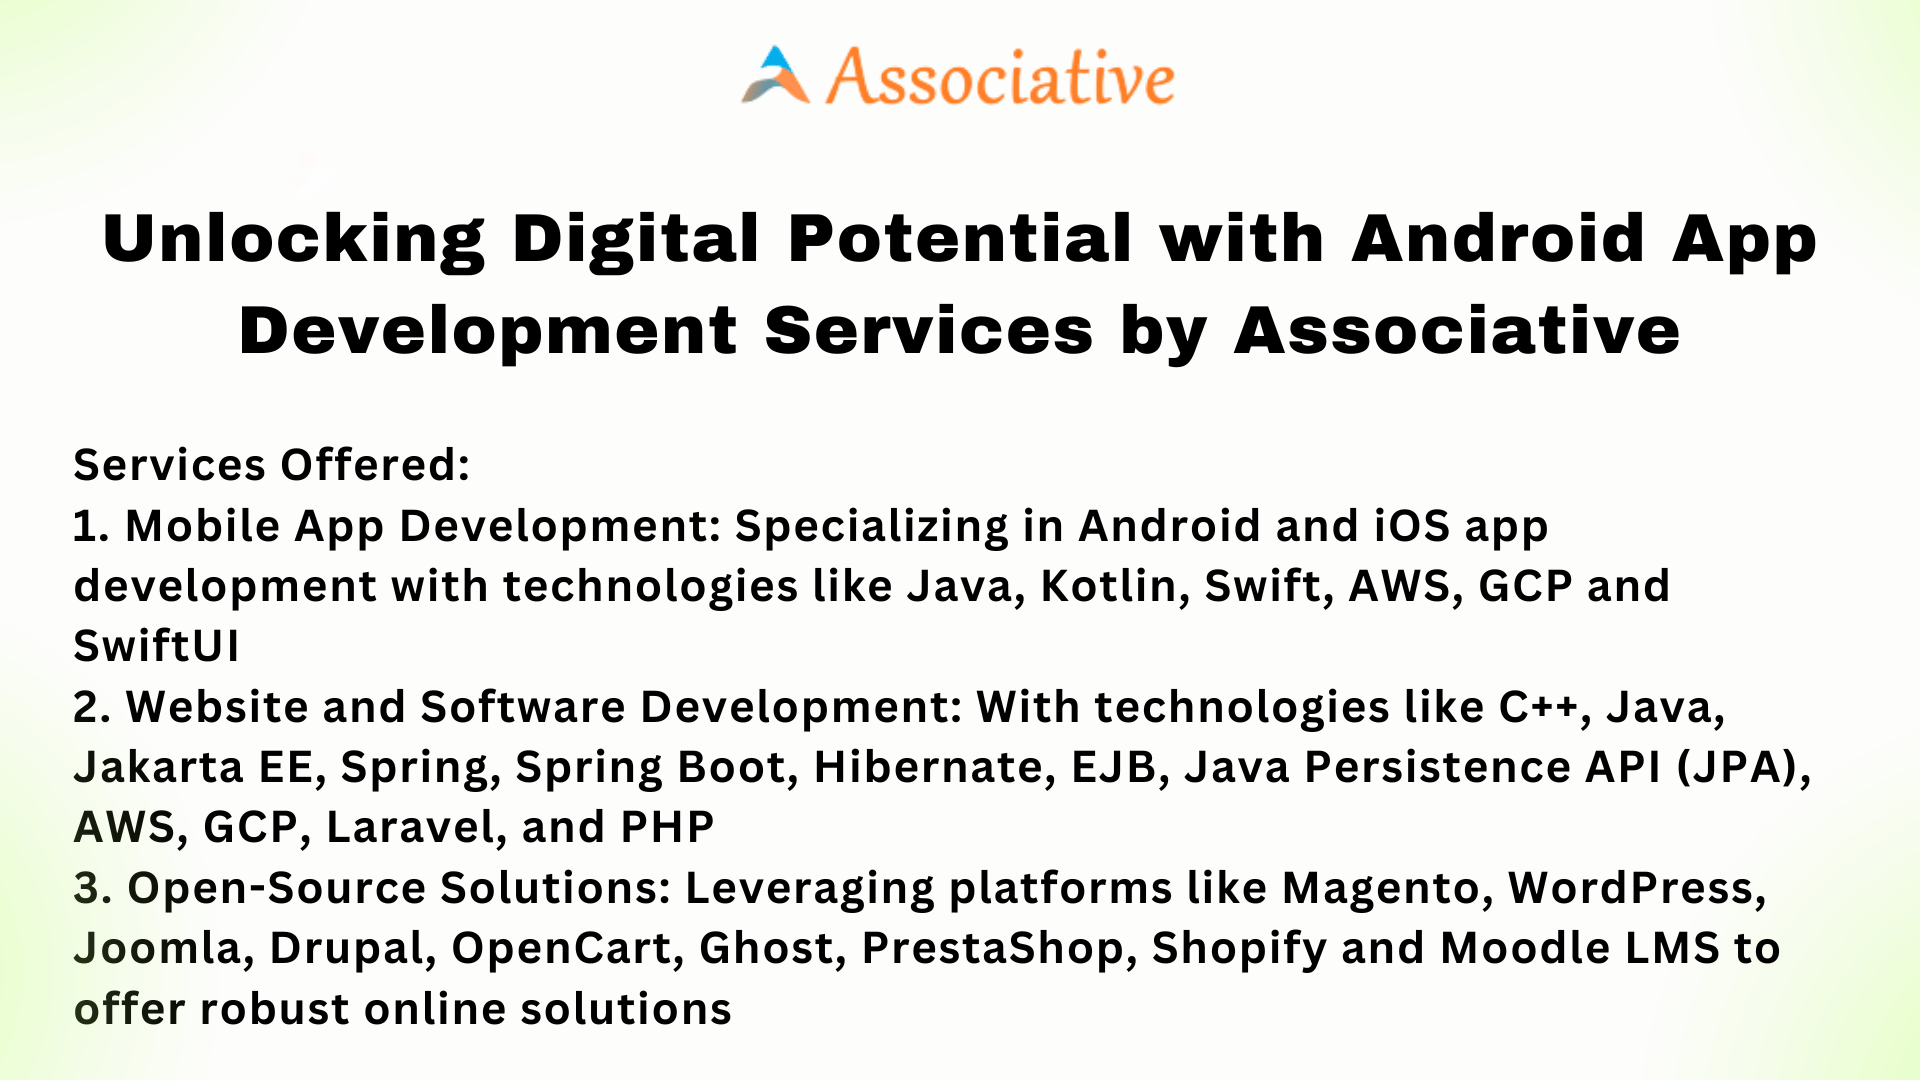 Unlocking Digital Potential with Android App Development Services by Associative